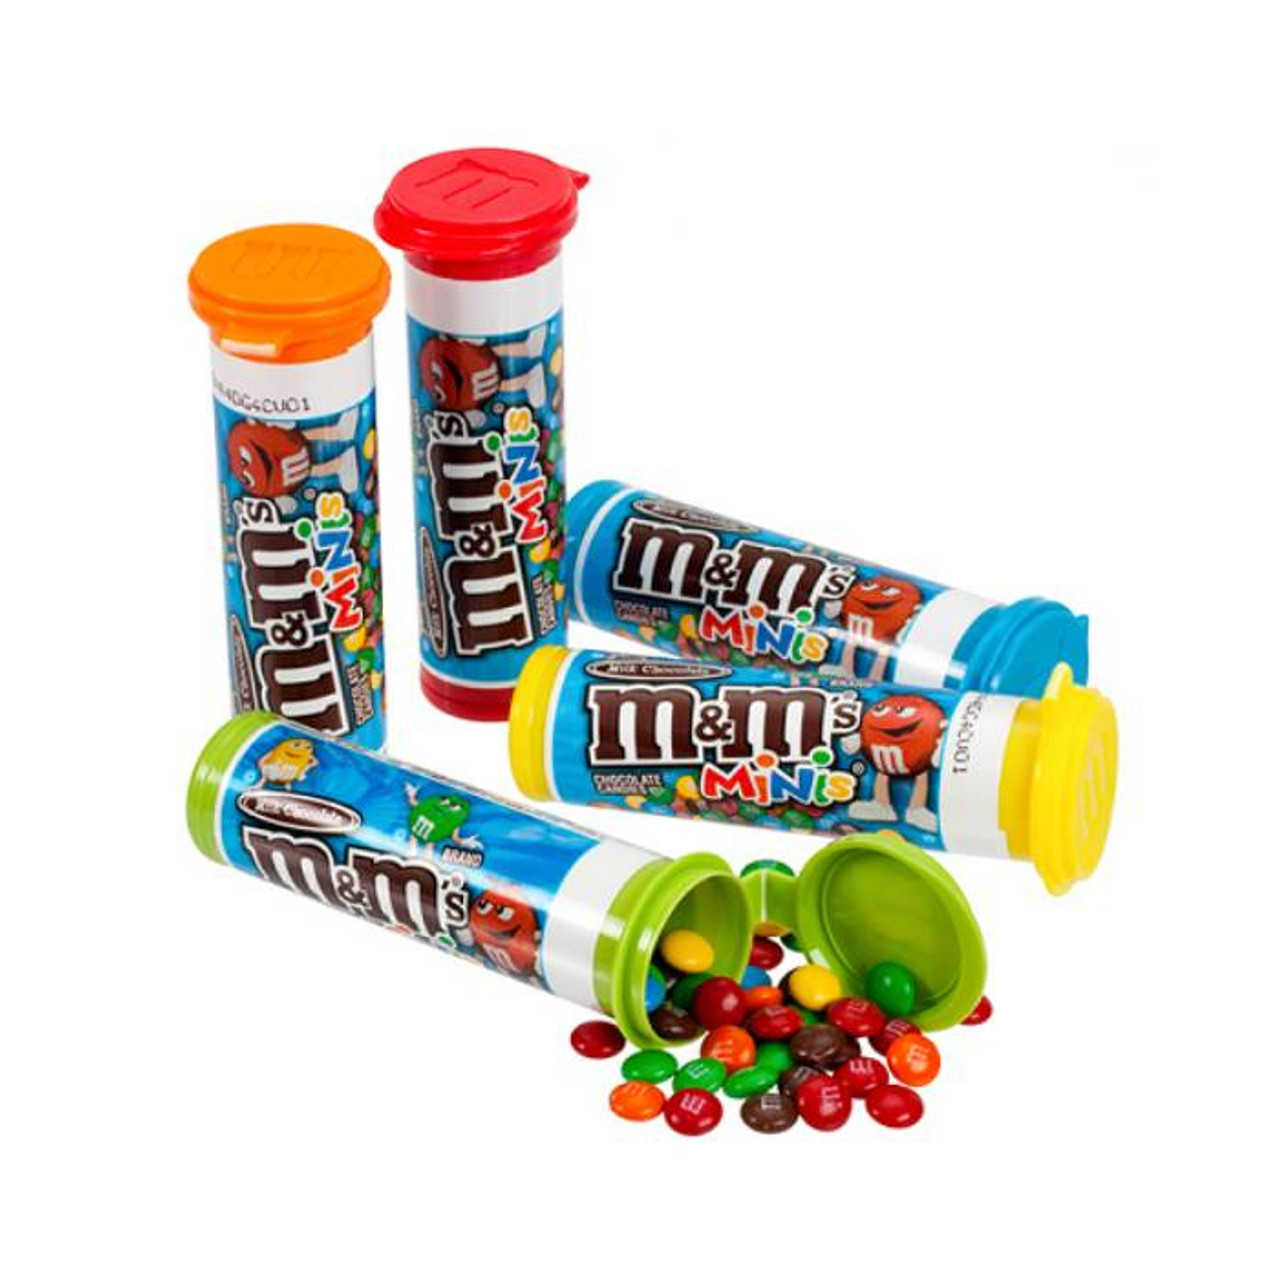 M&Ms Round Candy Dispenser Toy 15cm Gift Pack with Milk Chocolate Candies,  45g, 283 g